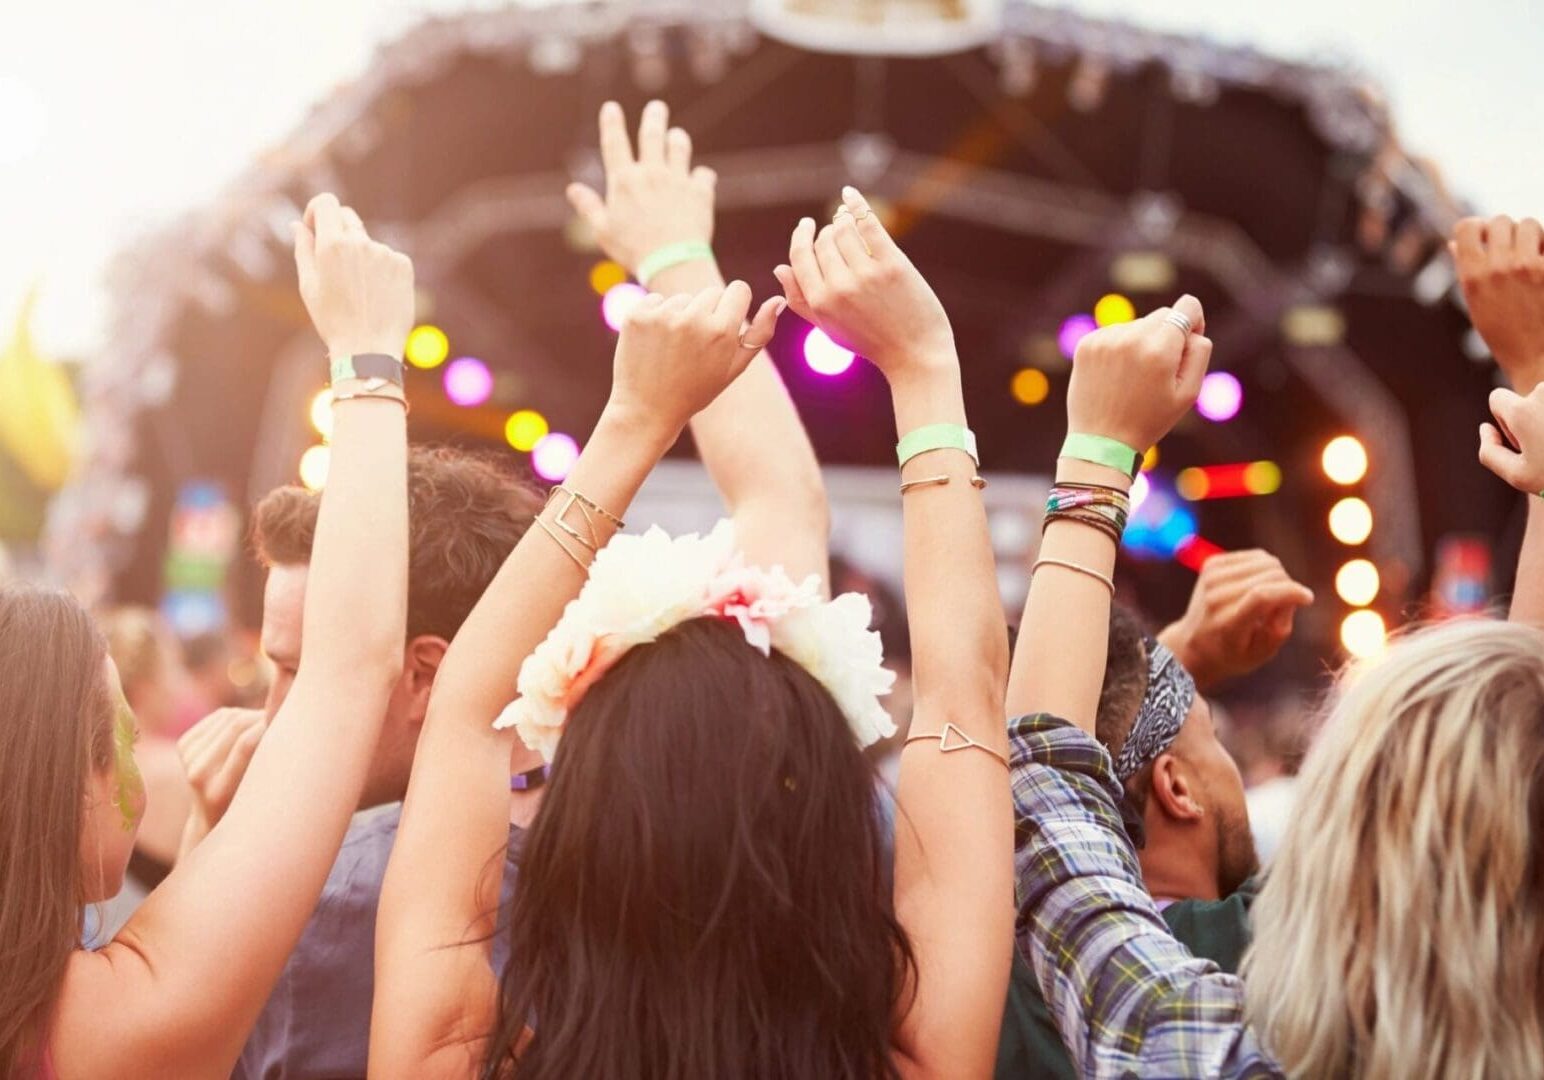 A group of people at an outdoor concert raising their hands.